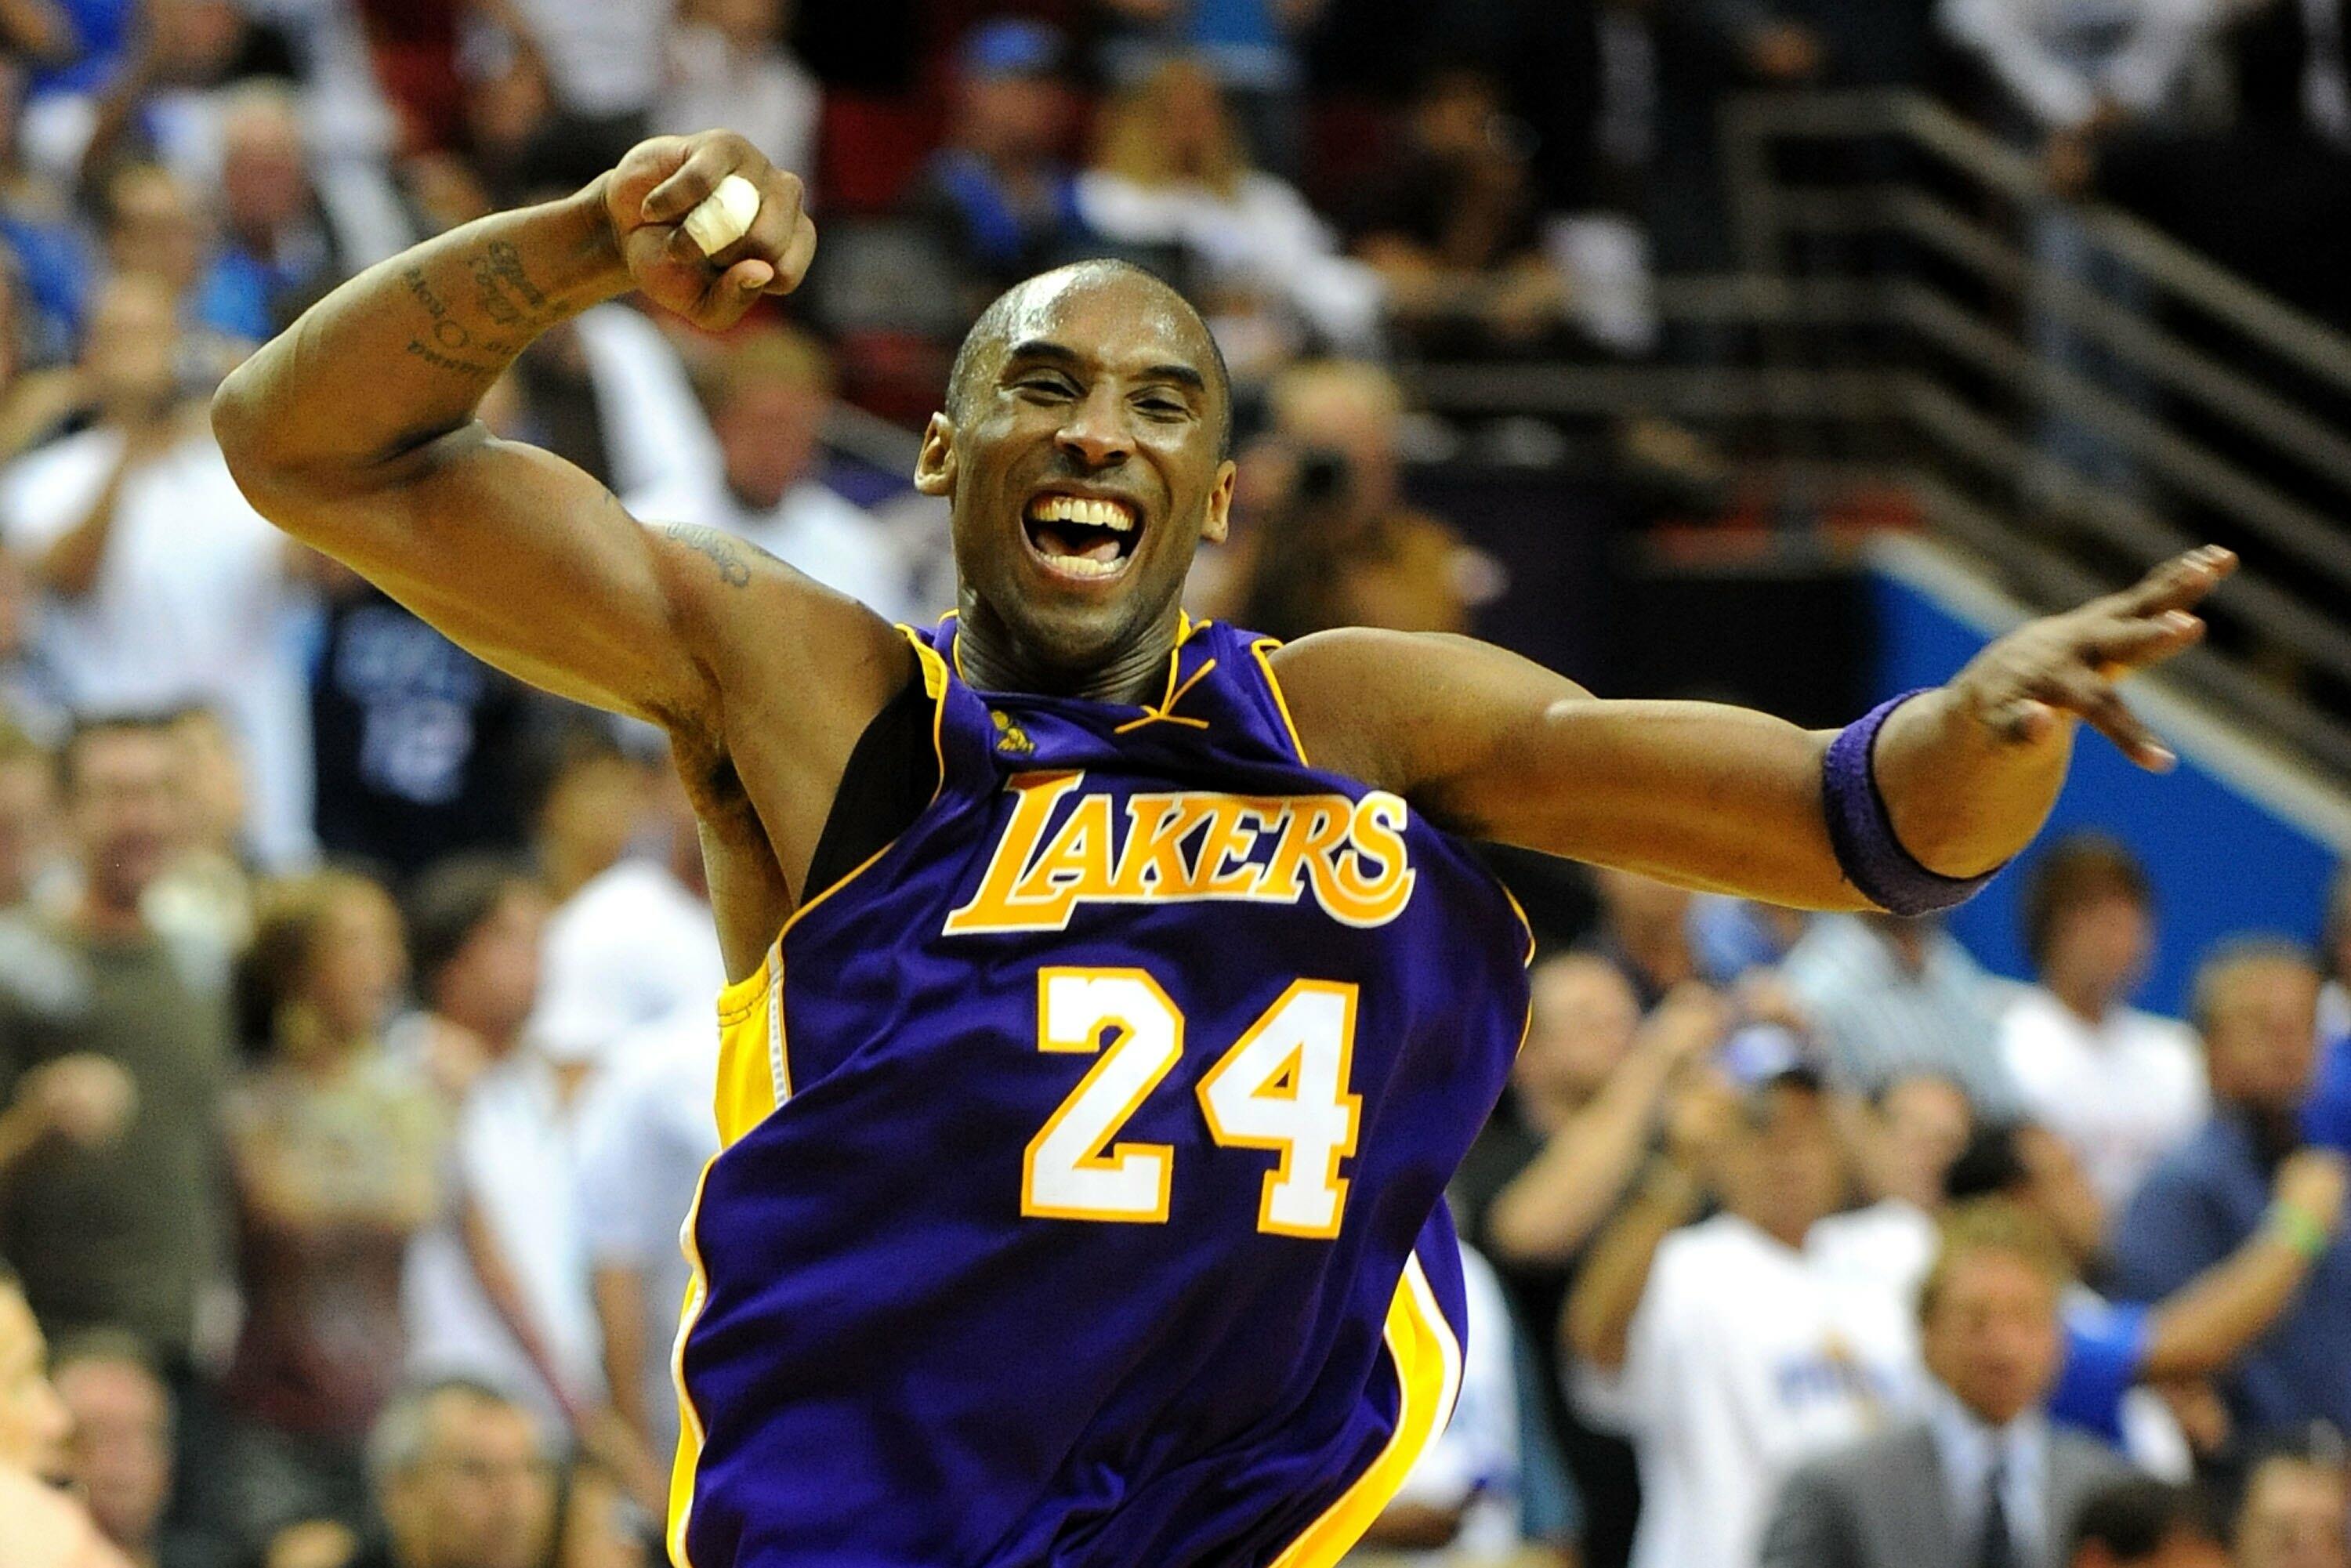 Babies born on Aug. 23 got Kobe care packages from Lakers, UCLA Health